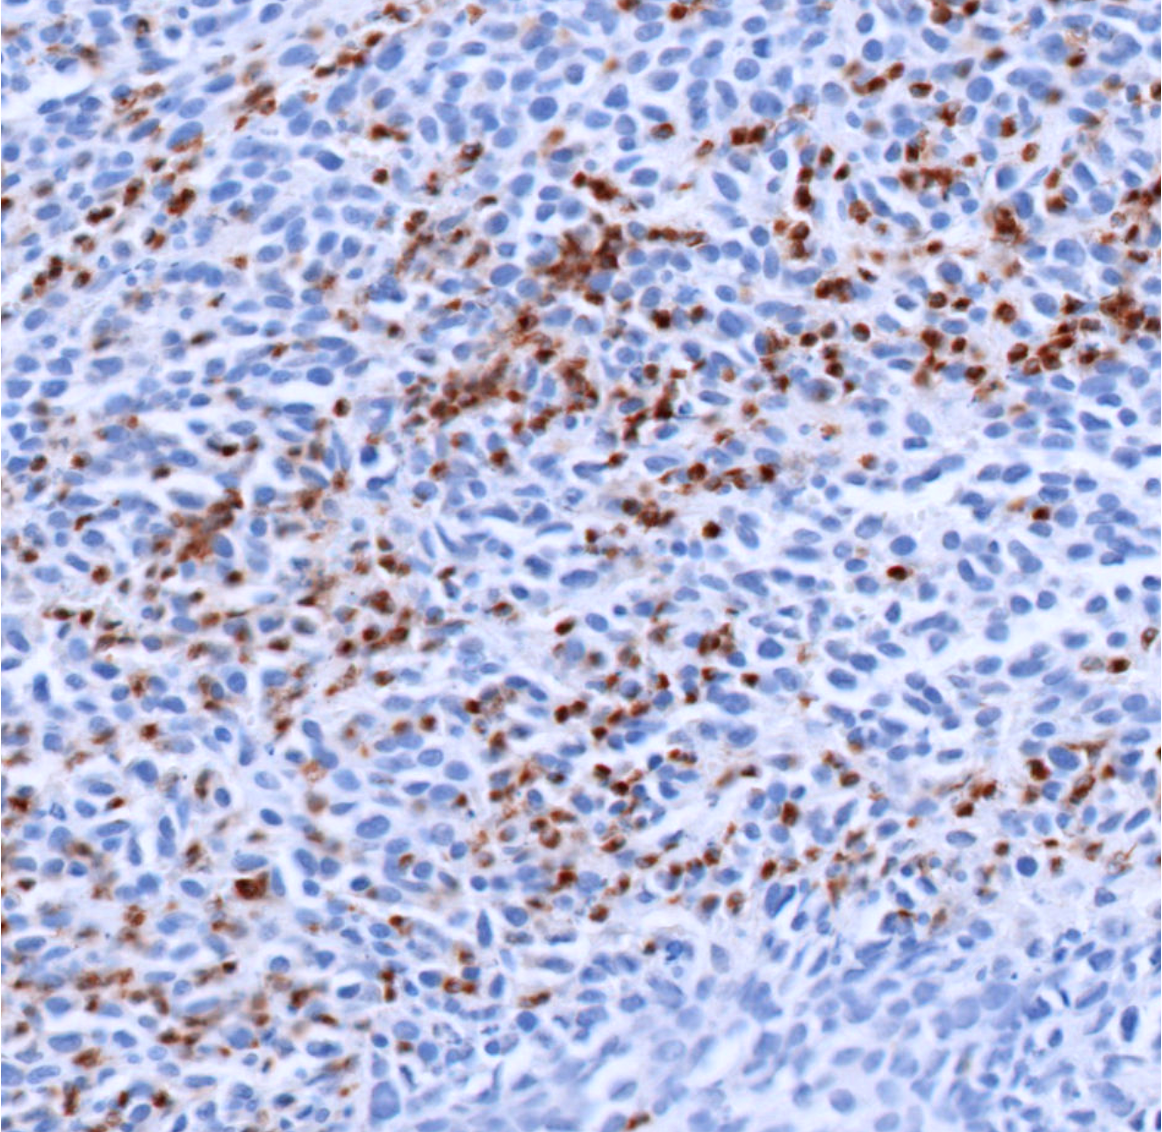 Ly6G-Ionpath-MIBI-staining-FFPE-mouse-spleen